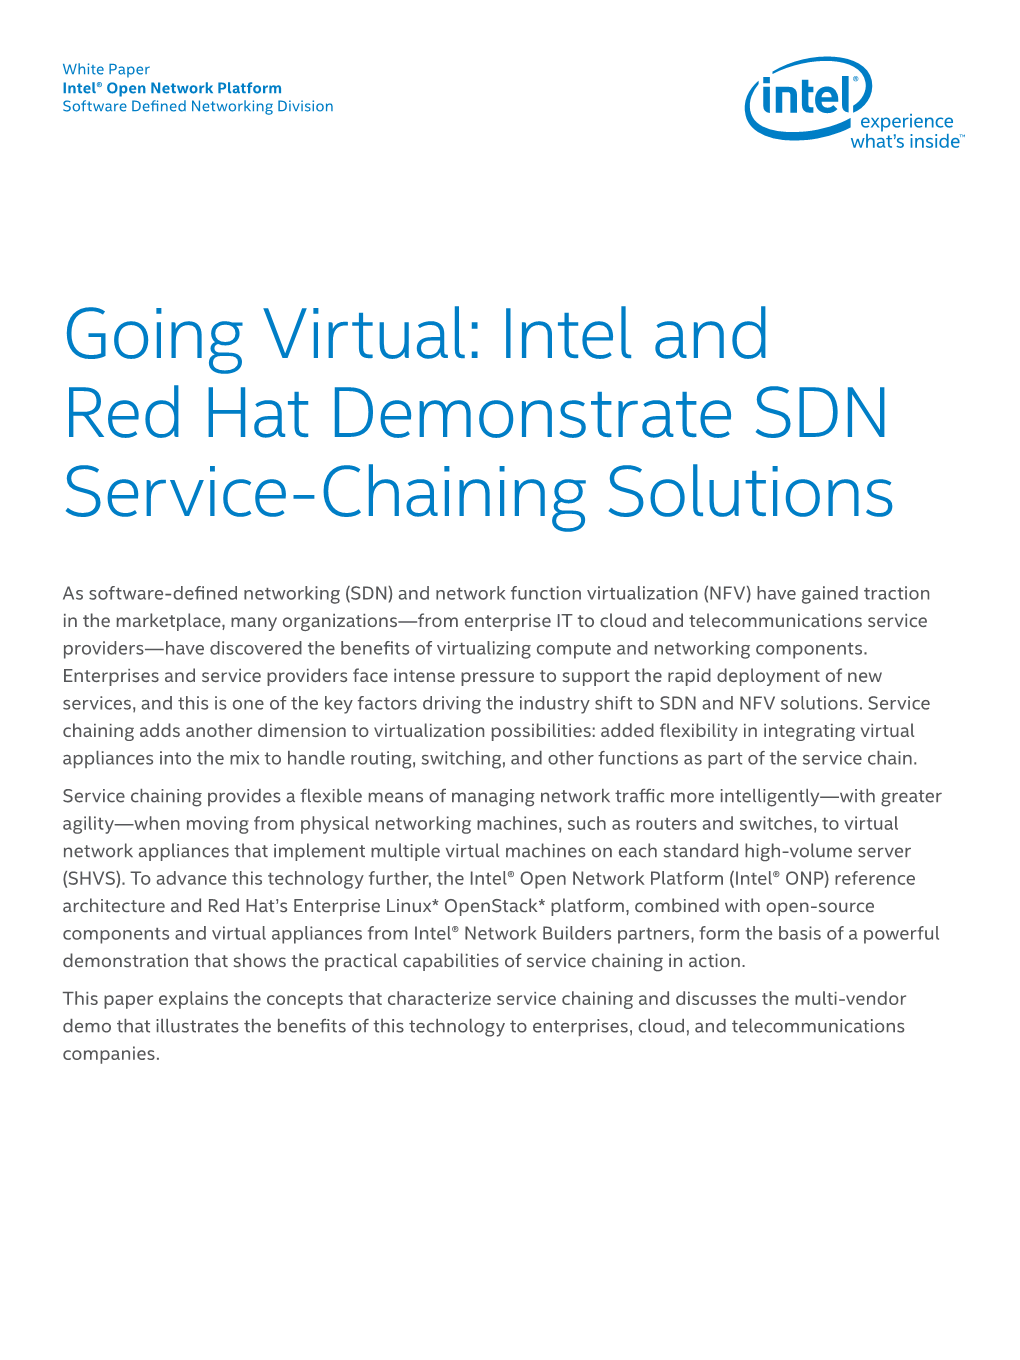 Intel and Red Hat Demonstrate SDN Service-Chaining Solutions